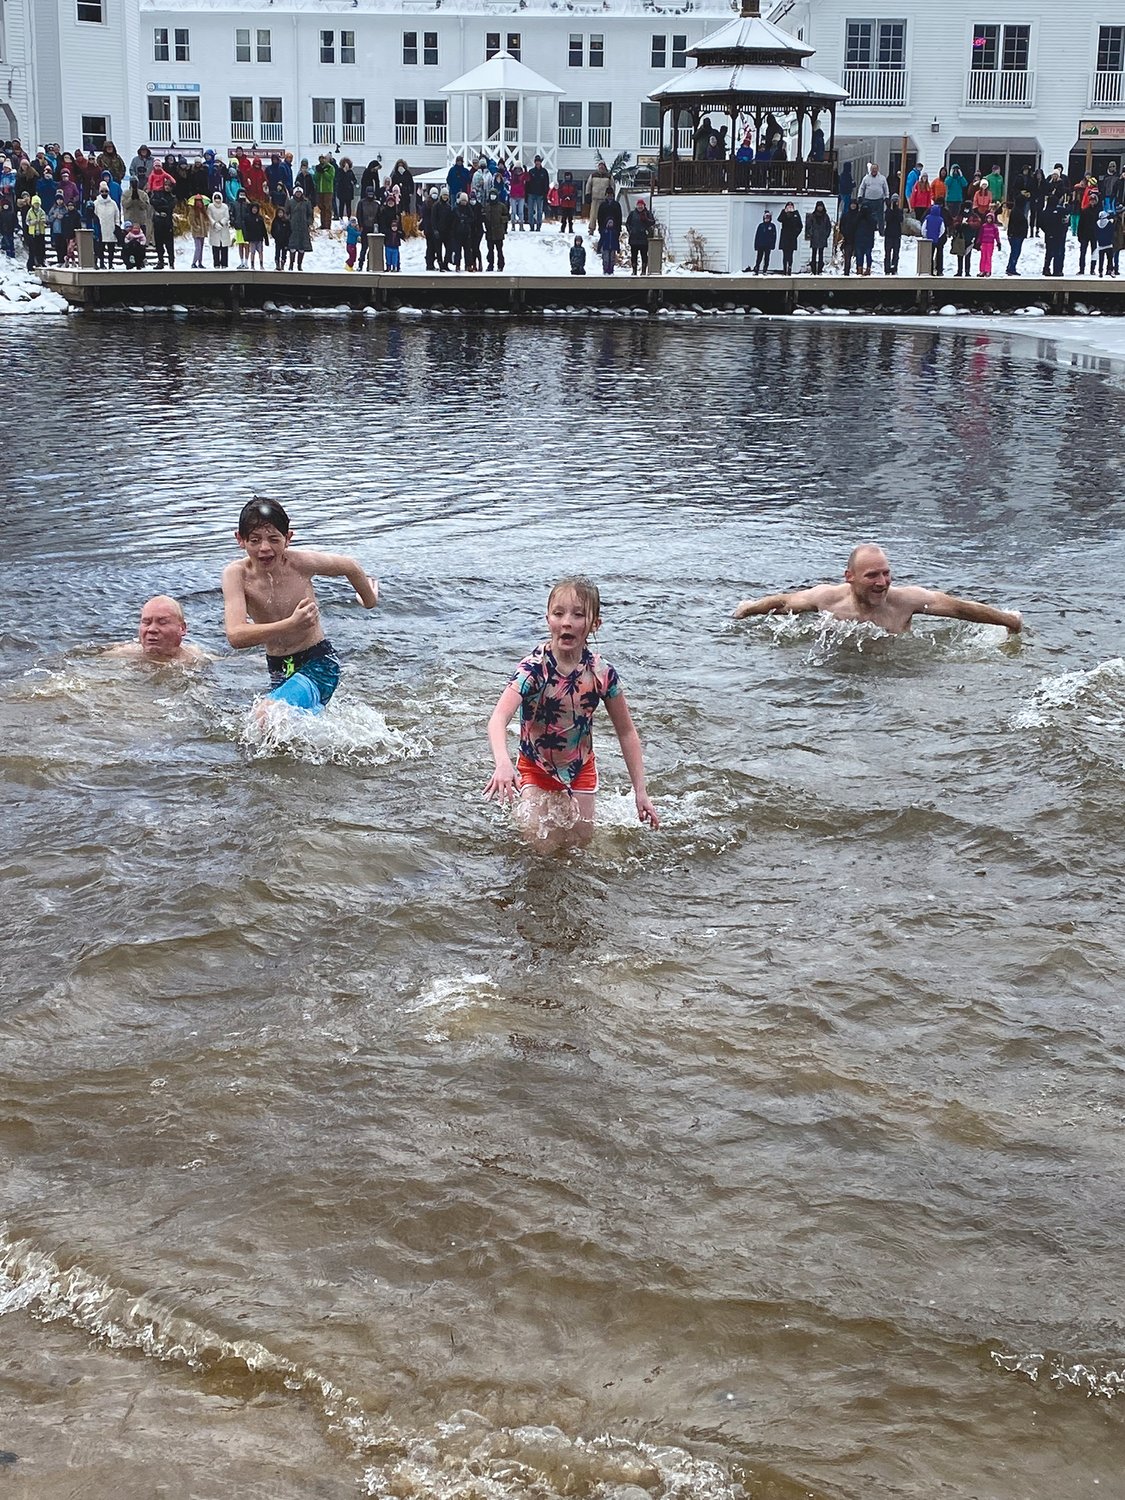 TAKING THE PLUNGE: Grandpa Jerry Shannon, Cousin Tiernan Shannon, Hannah McNally and Uncle Tim Shannon crawl out of the frigid water at the annual "Freezin' for a Reason" plunge in Waterville Valley over Thanksgiving weekend.